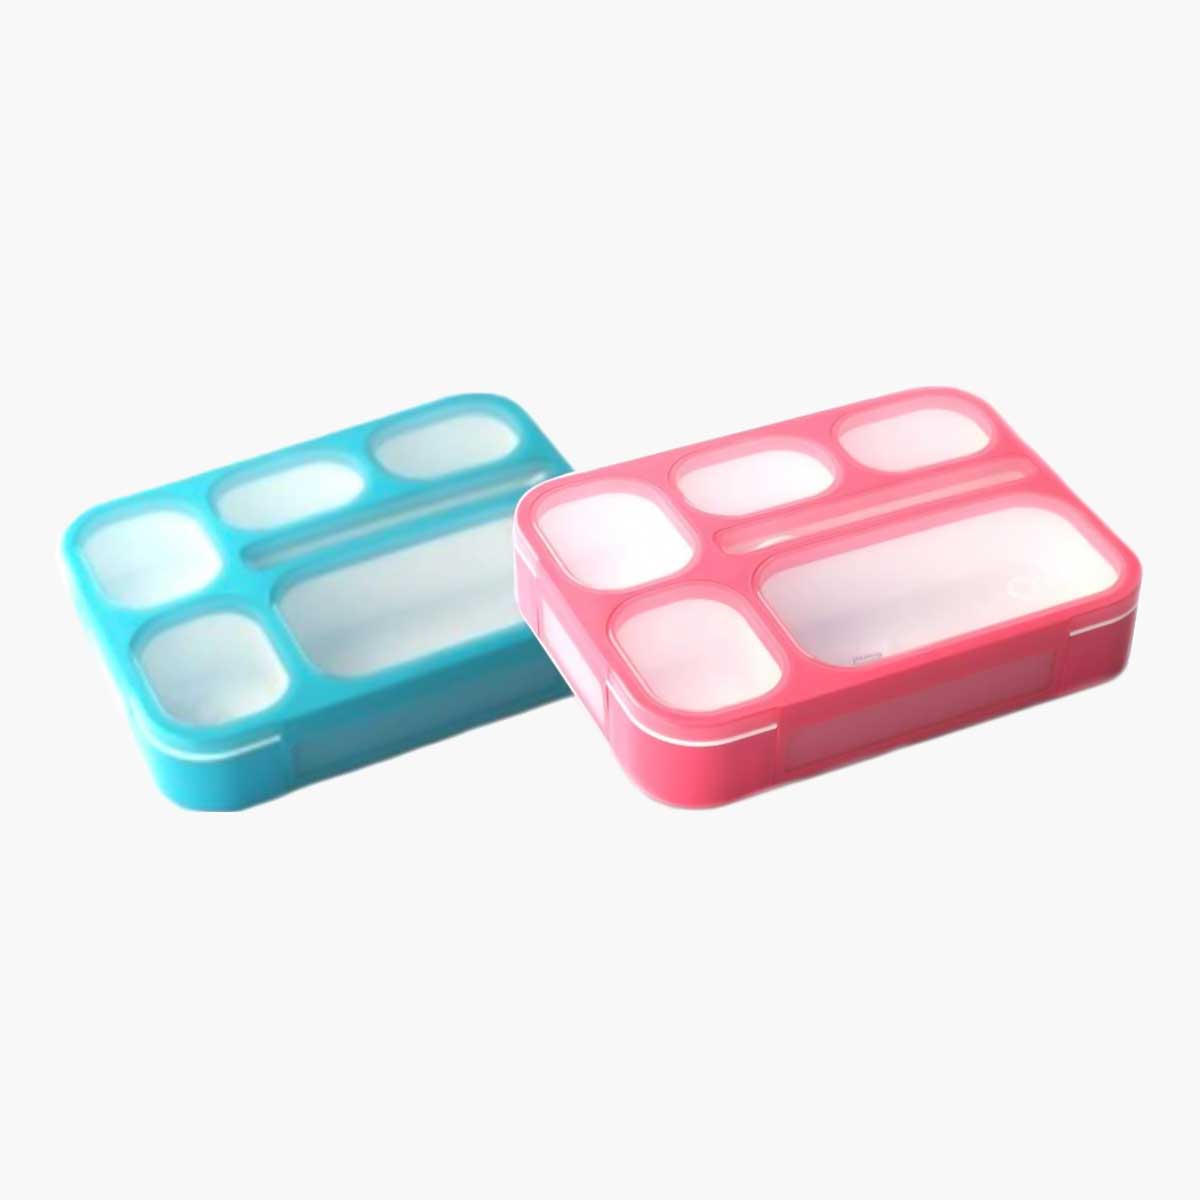 Bento Box Lunch Containers blue and pink.